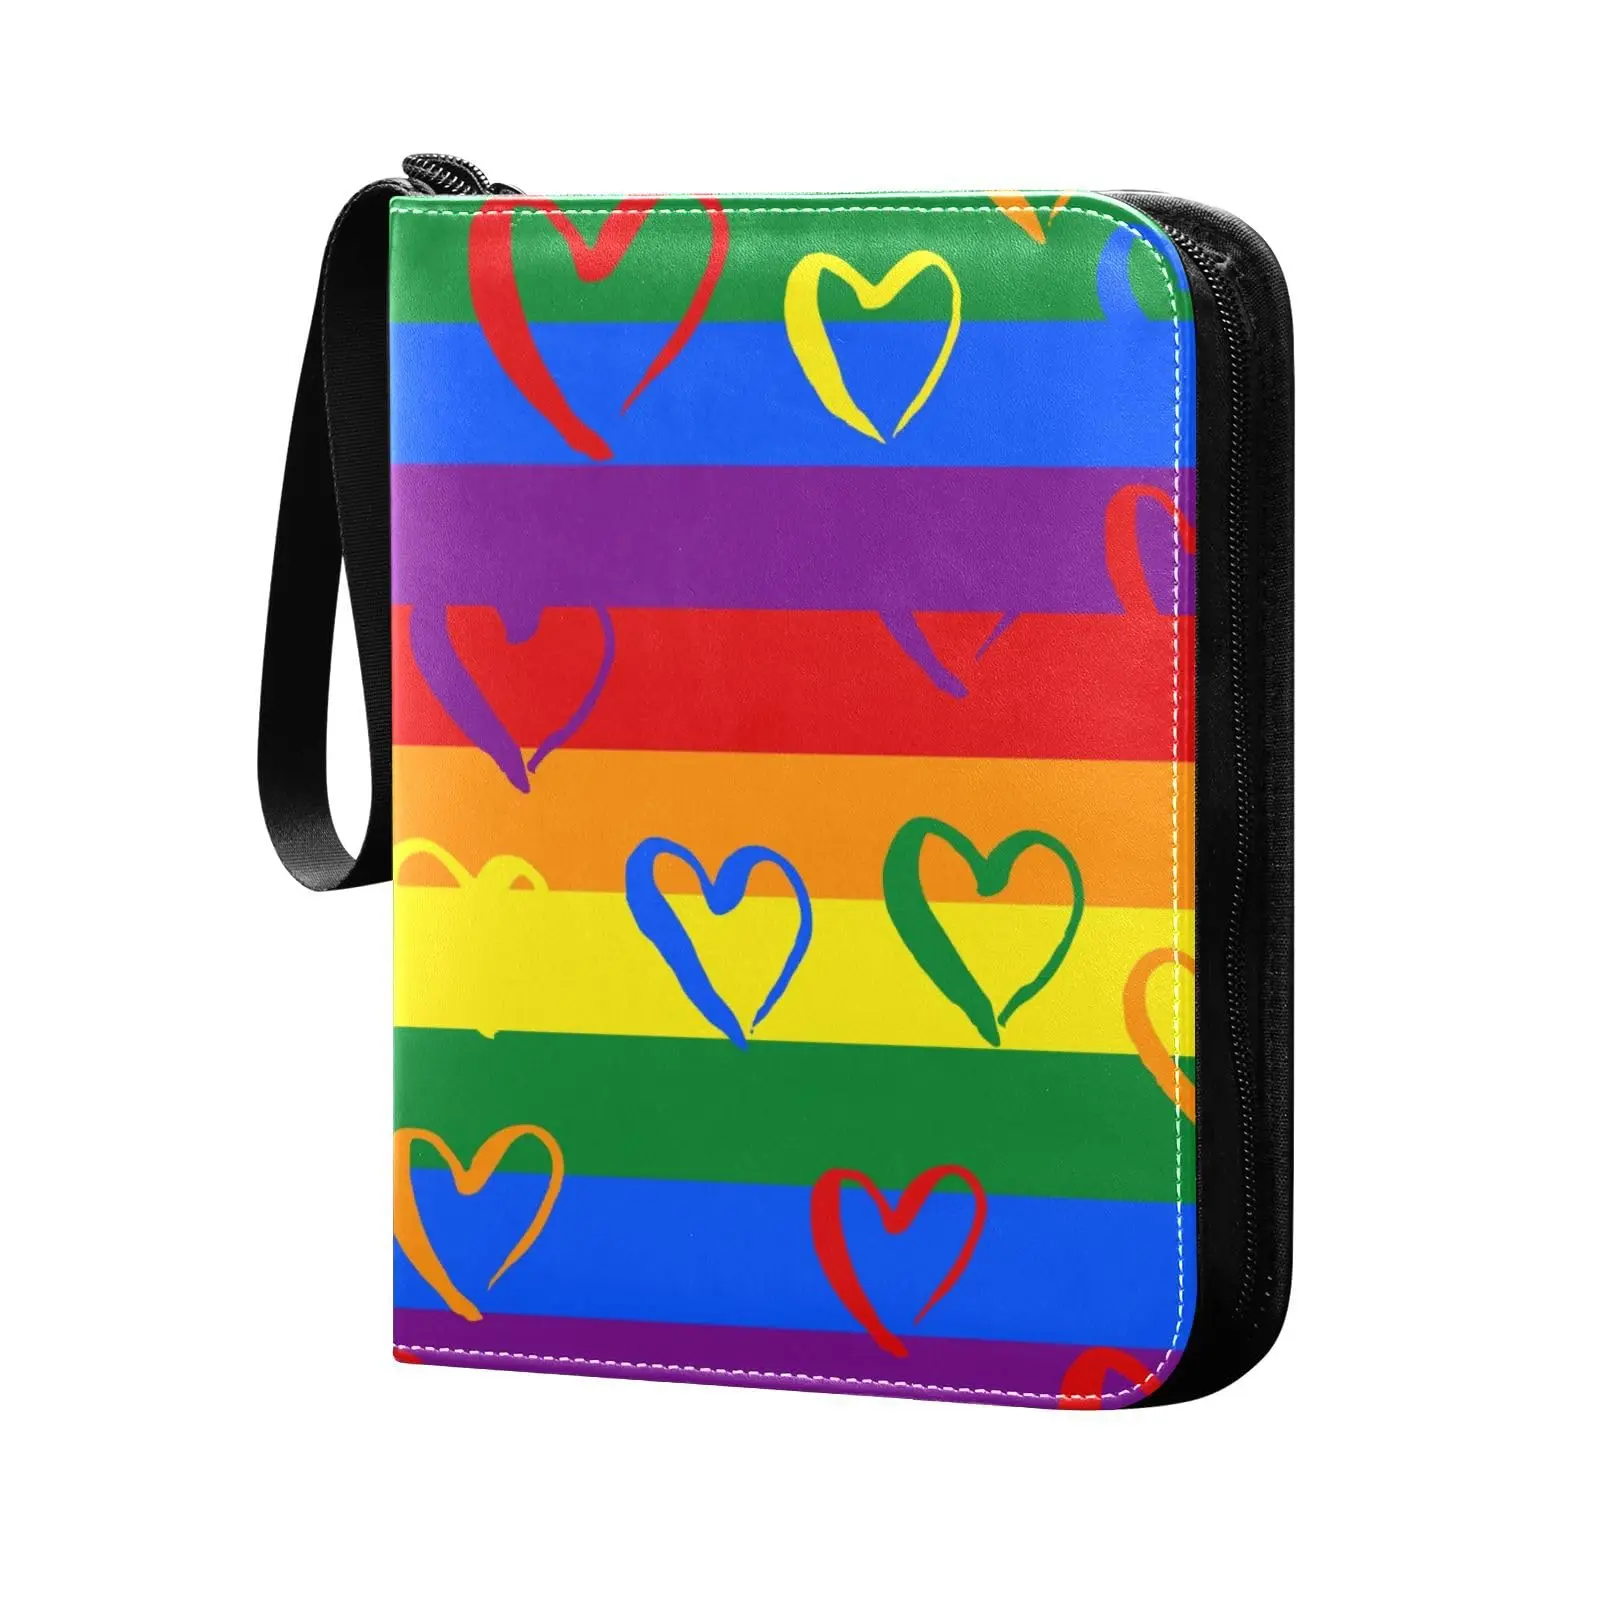 

Colored Hearts Valentine's Day 4 Pocket Card Binder 400 Double Sided Pocket Album Sport Game Card Unique Card Collection Storage